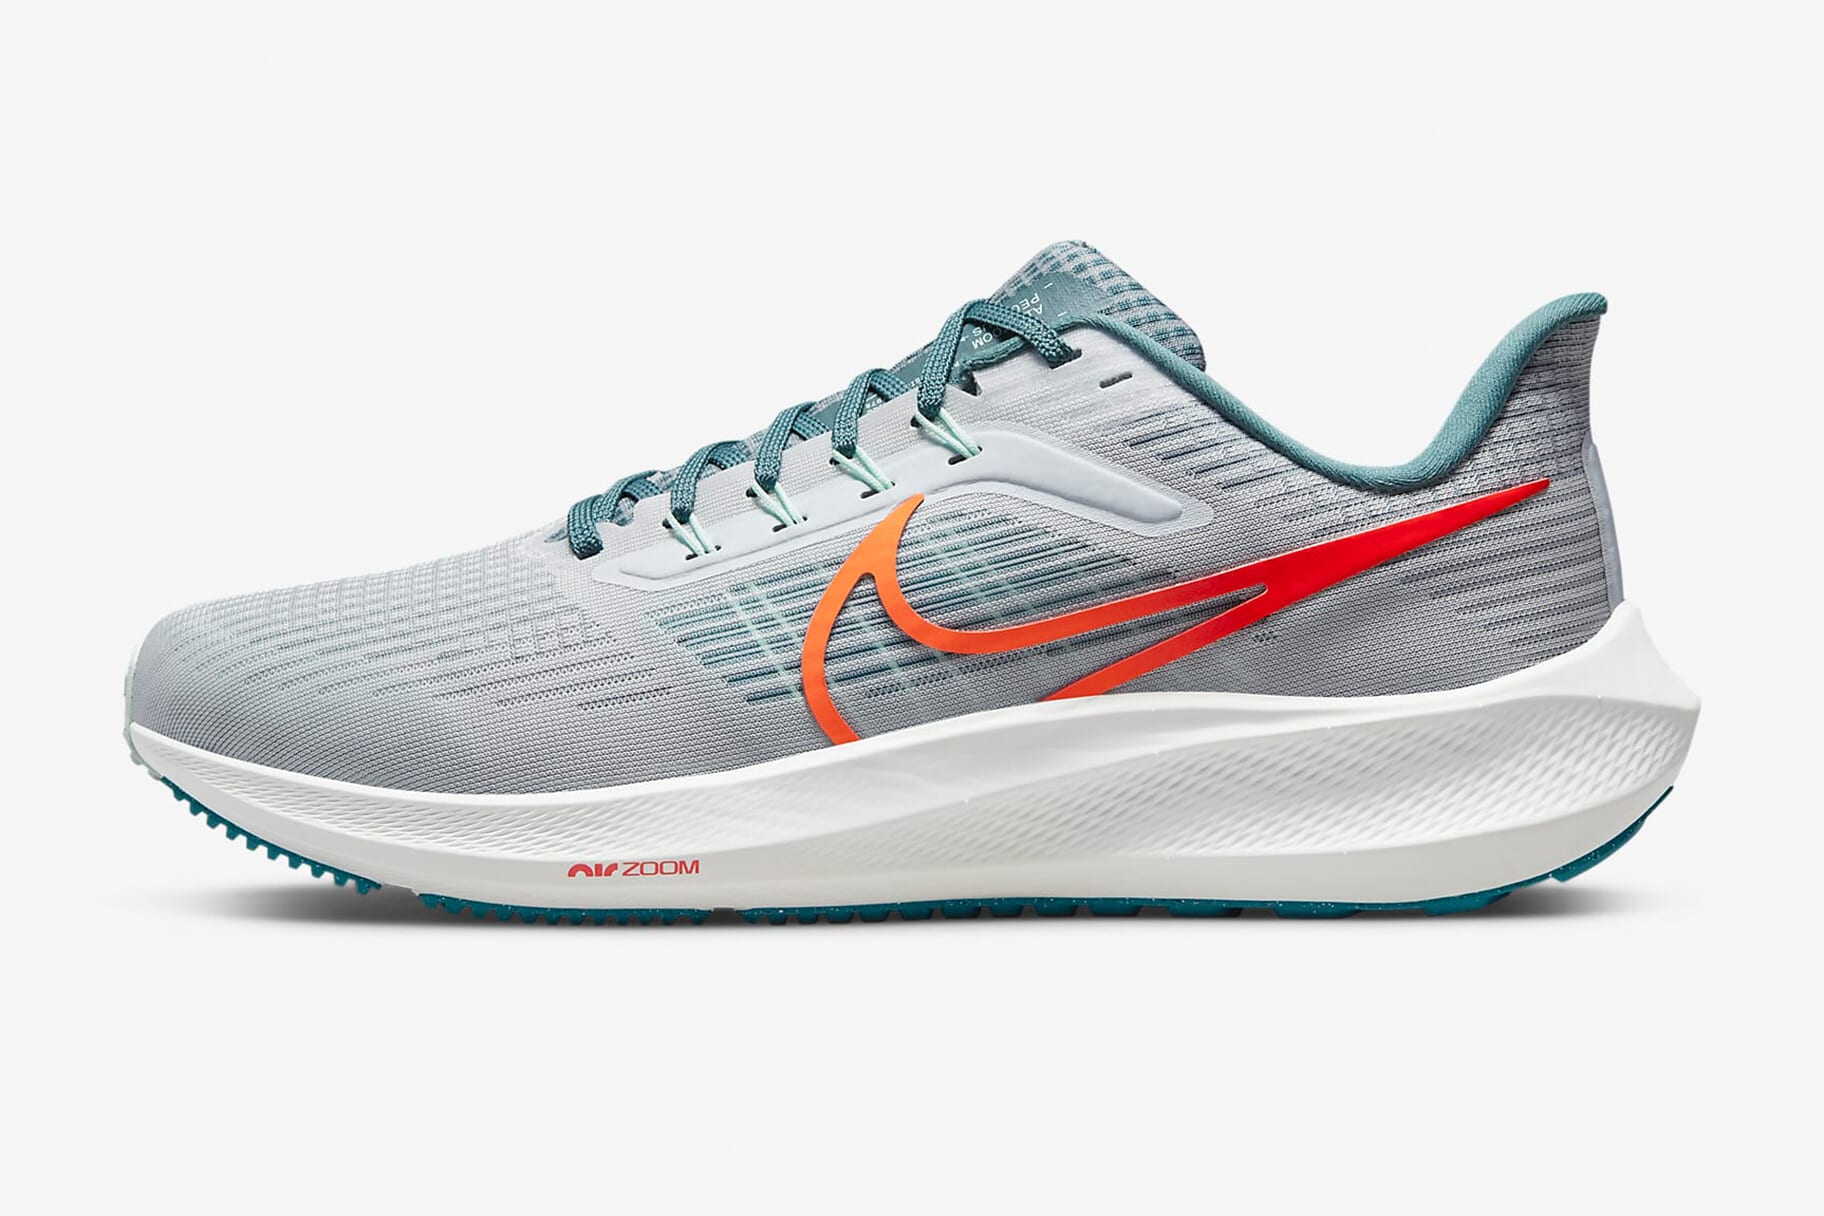 The Best Nike Running Shoes for Cross Nike.com